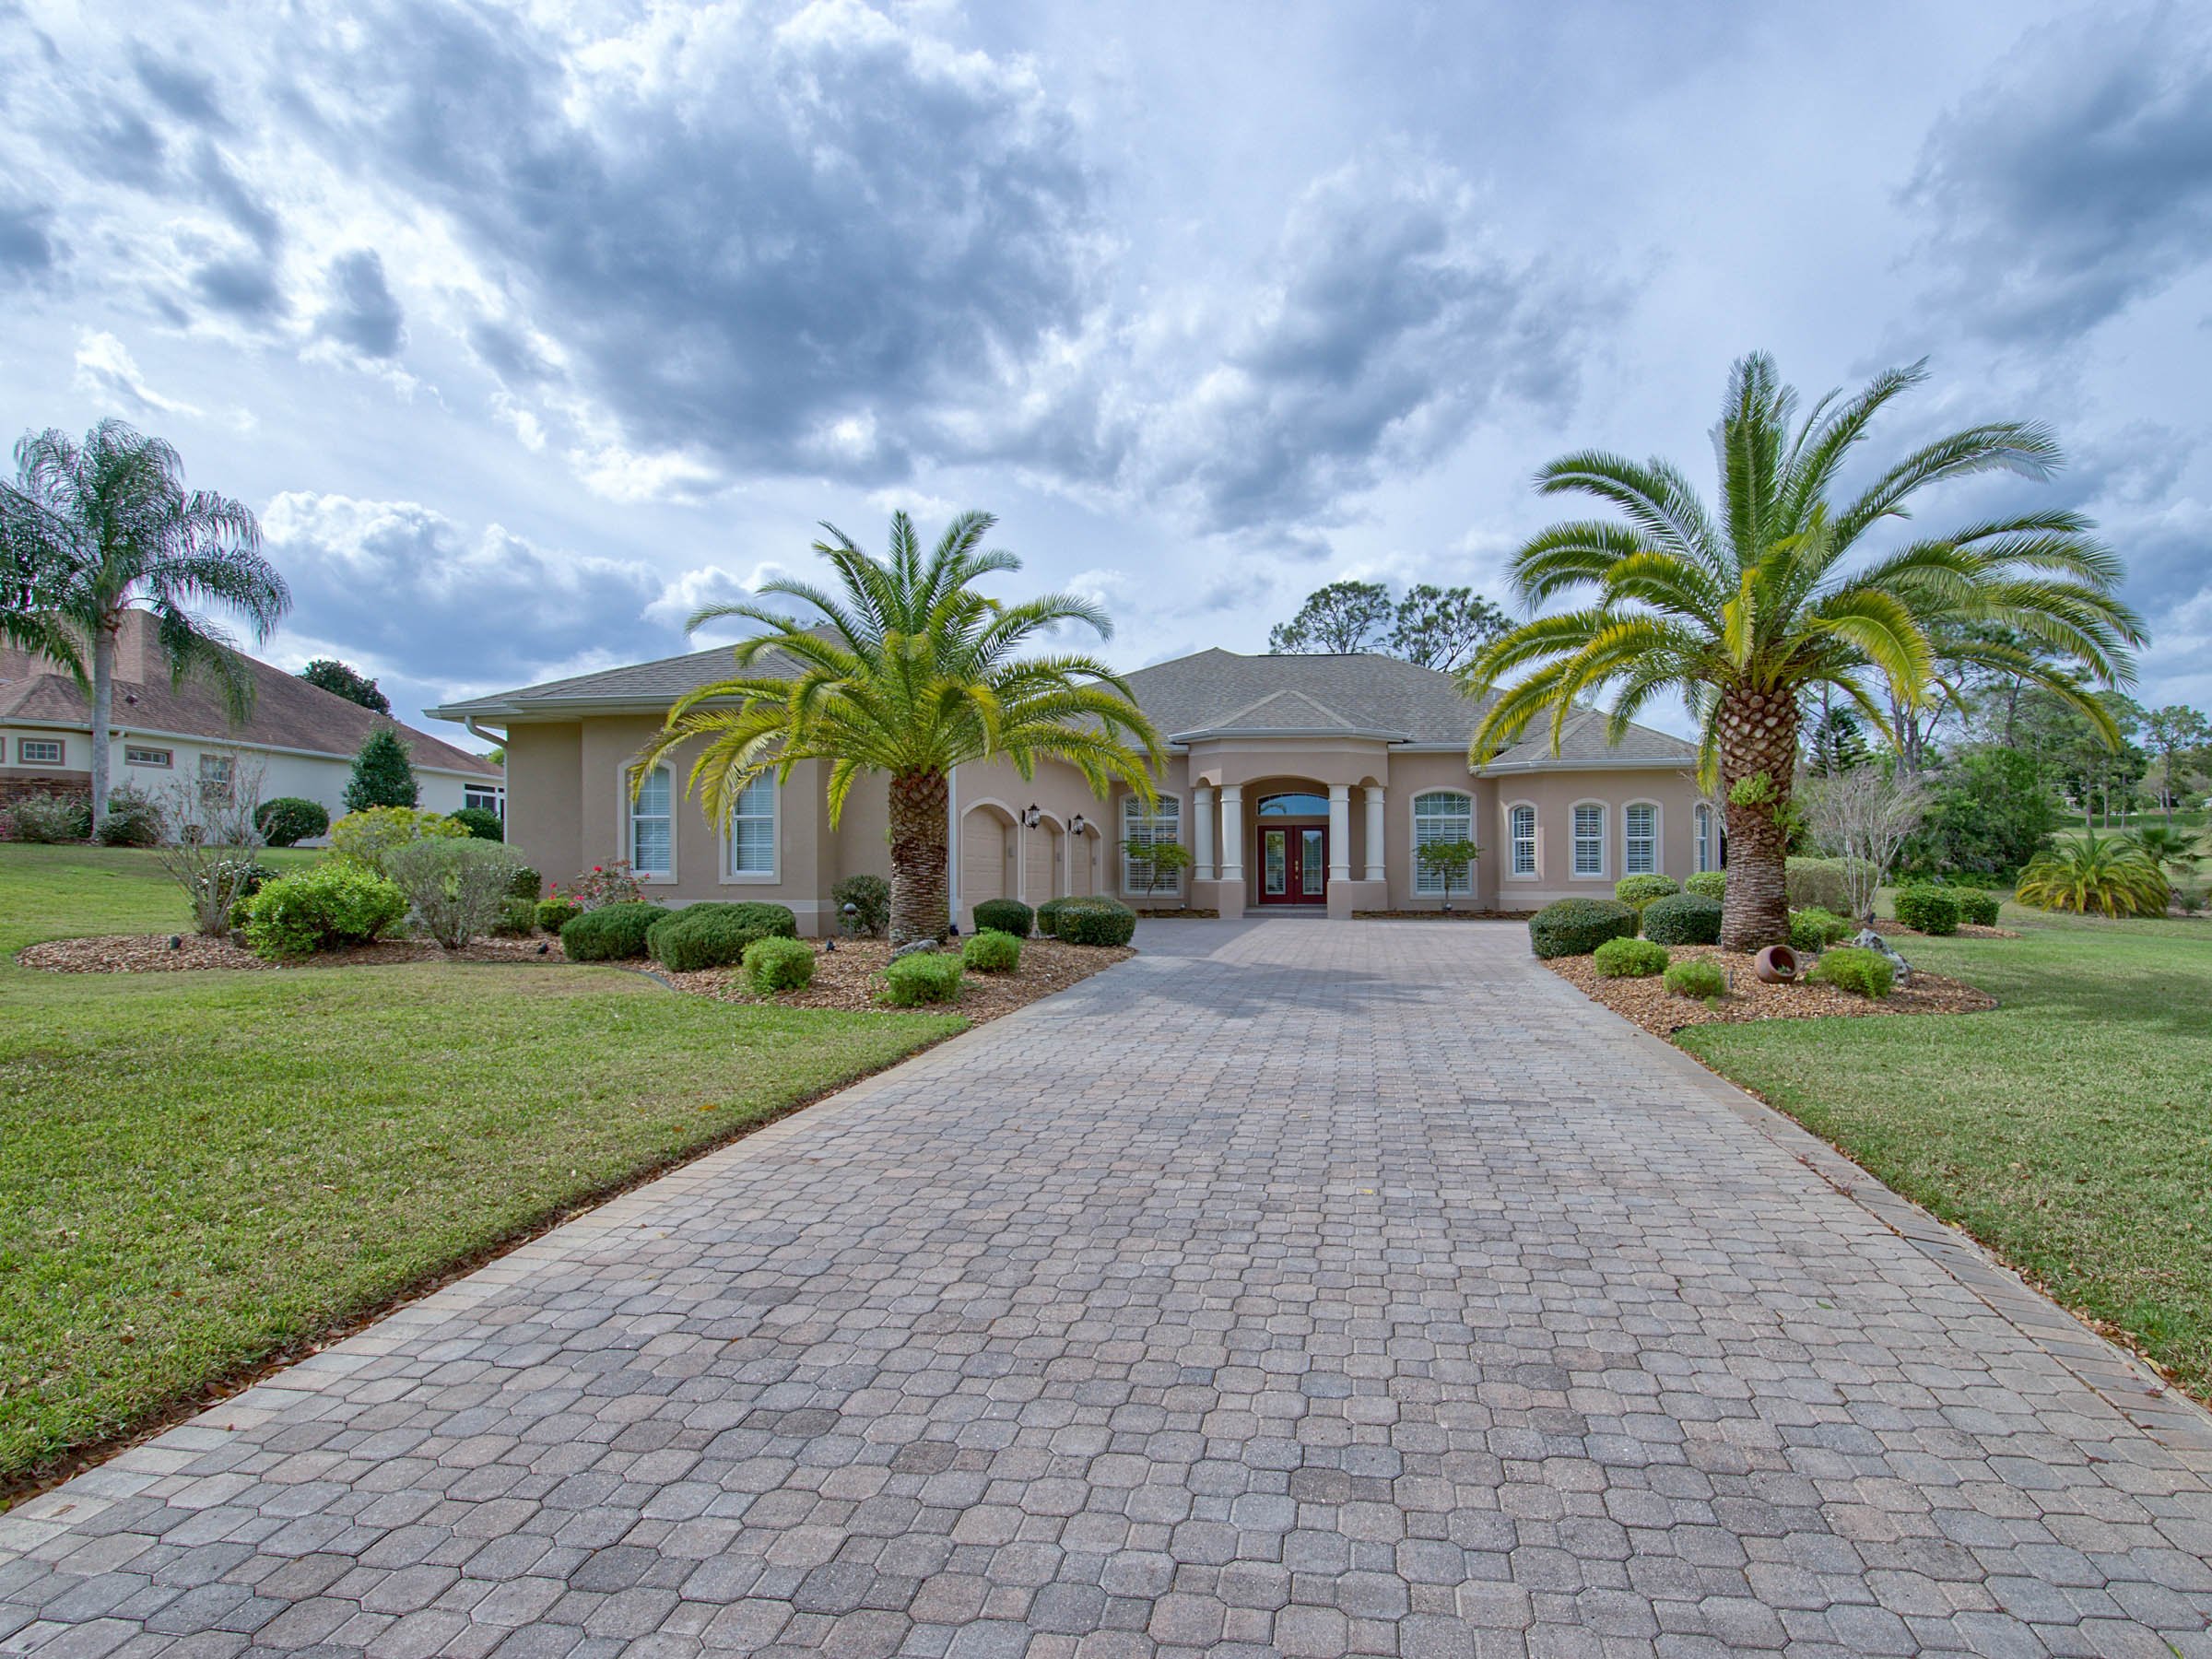 Virtual Open House: Top Homes For Sale In Lake County, FL